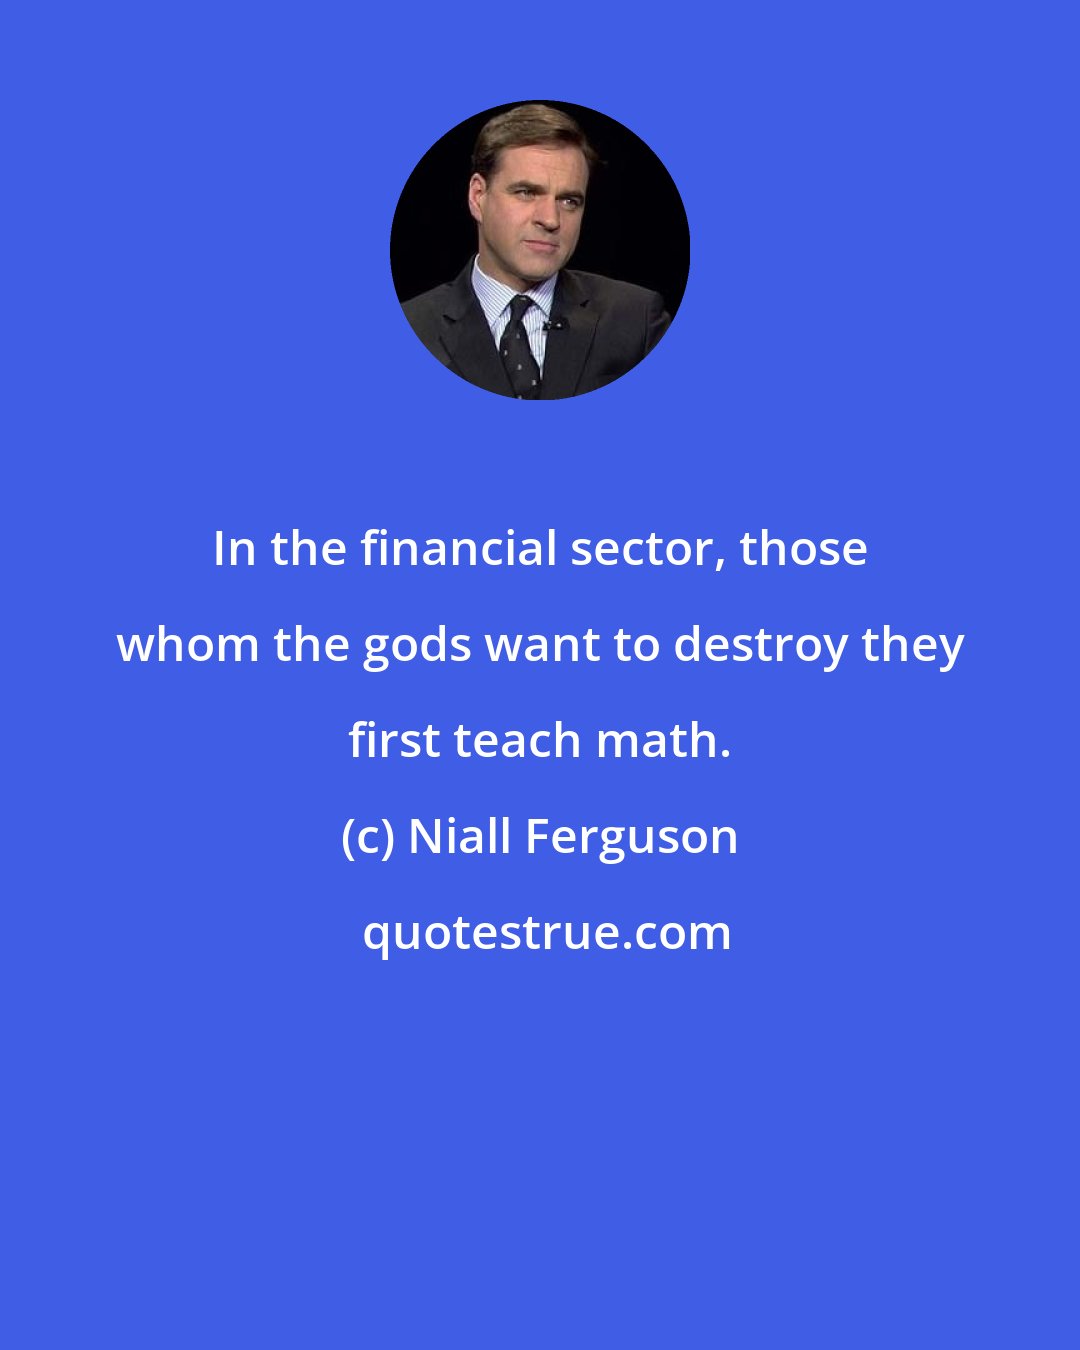 Niall Ferguson: In the financial sector, those whom the gods want to destroy they first teach math.